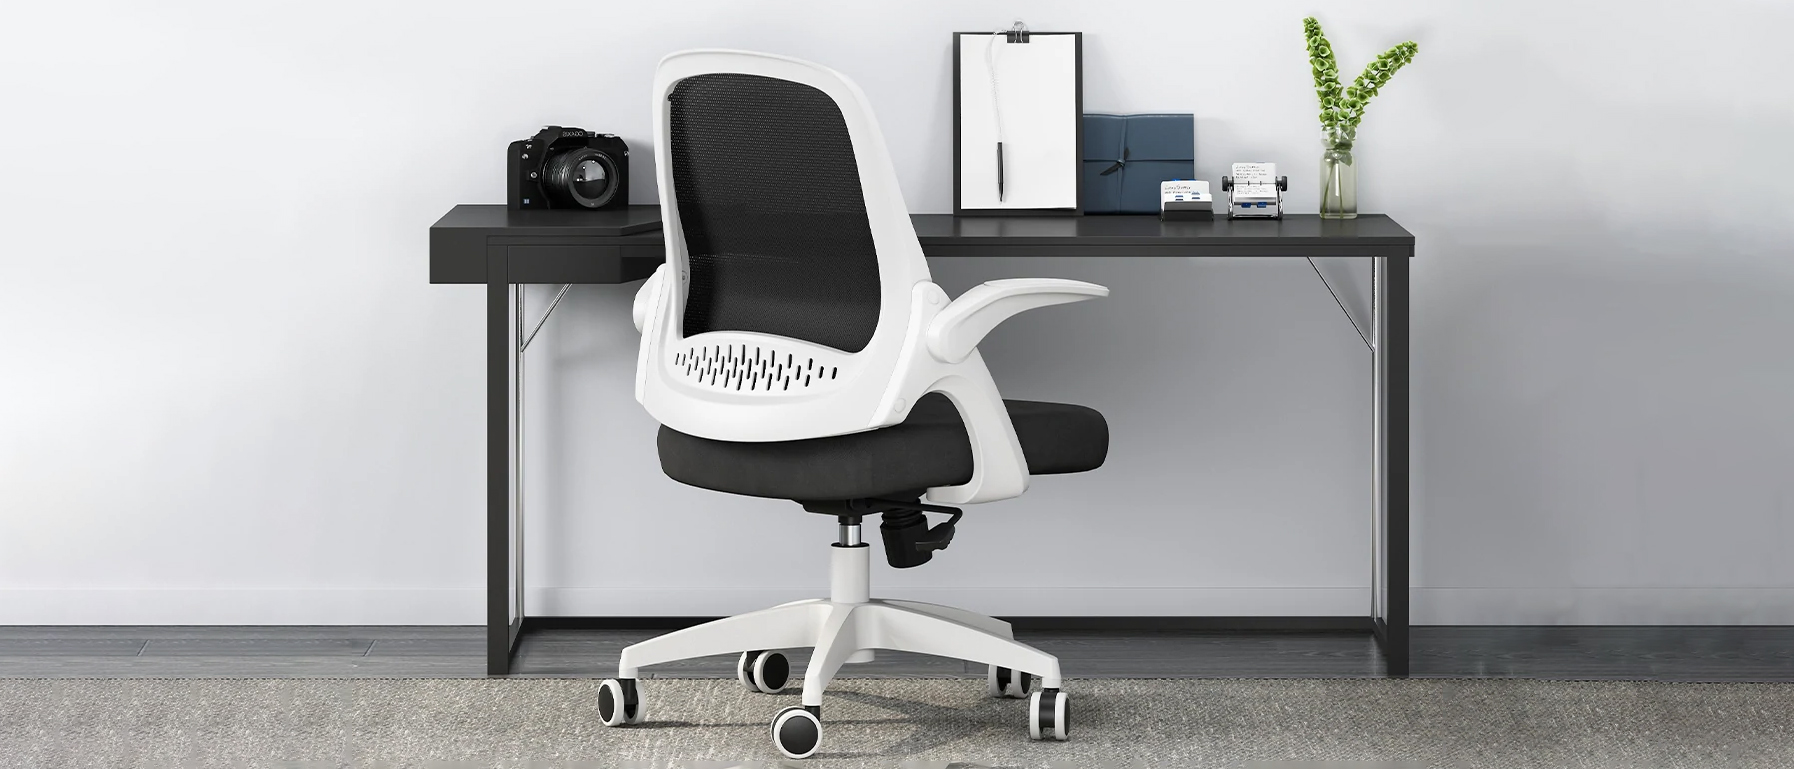 Branch Ergonomic Chair review: Stylish supportive seat - Reviewed